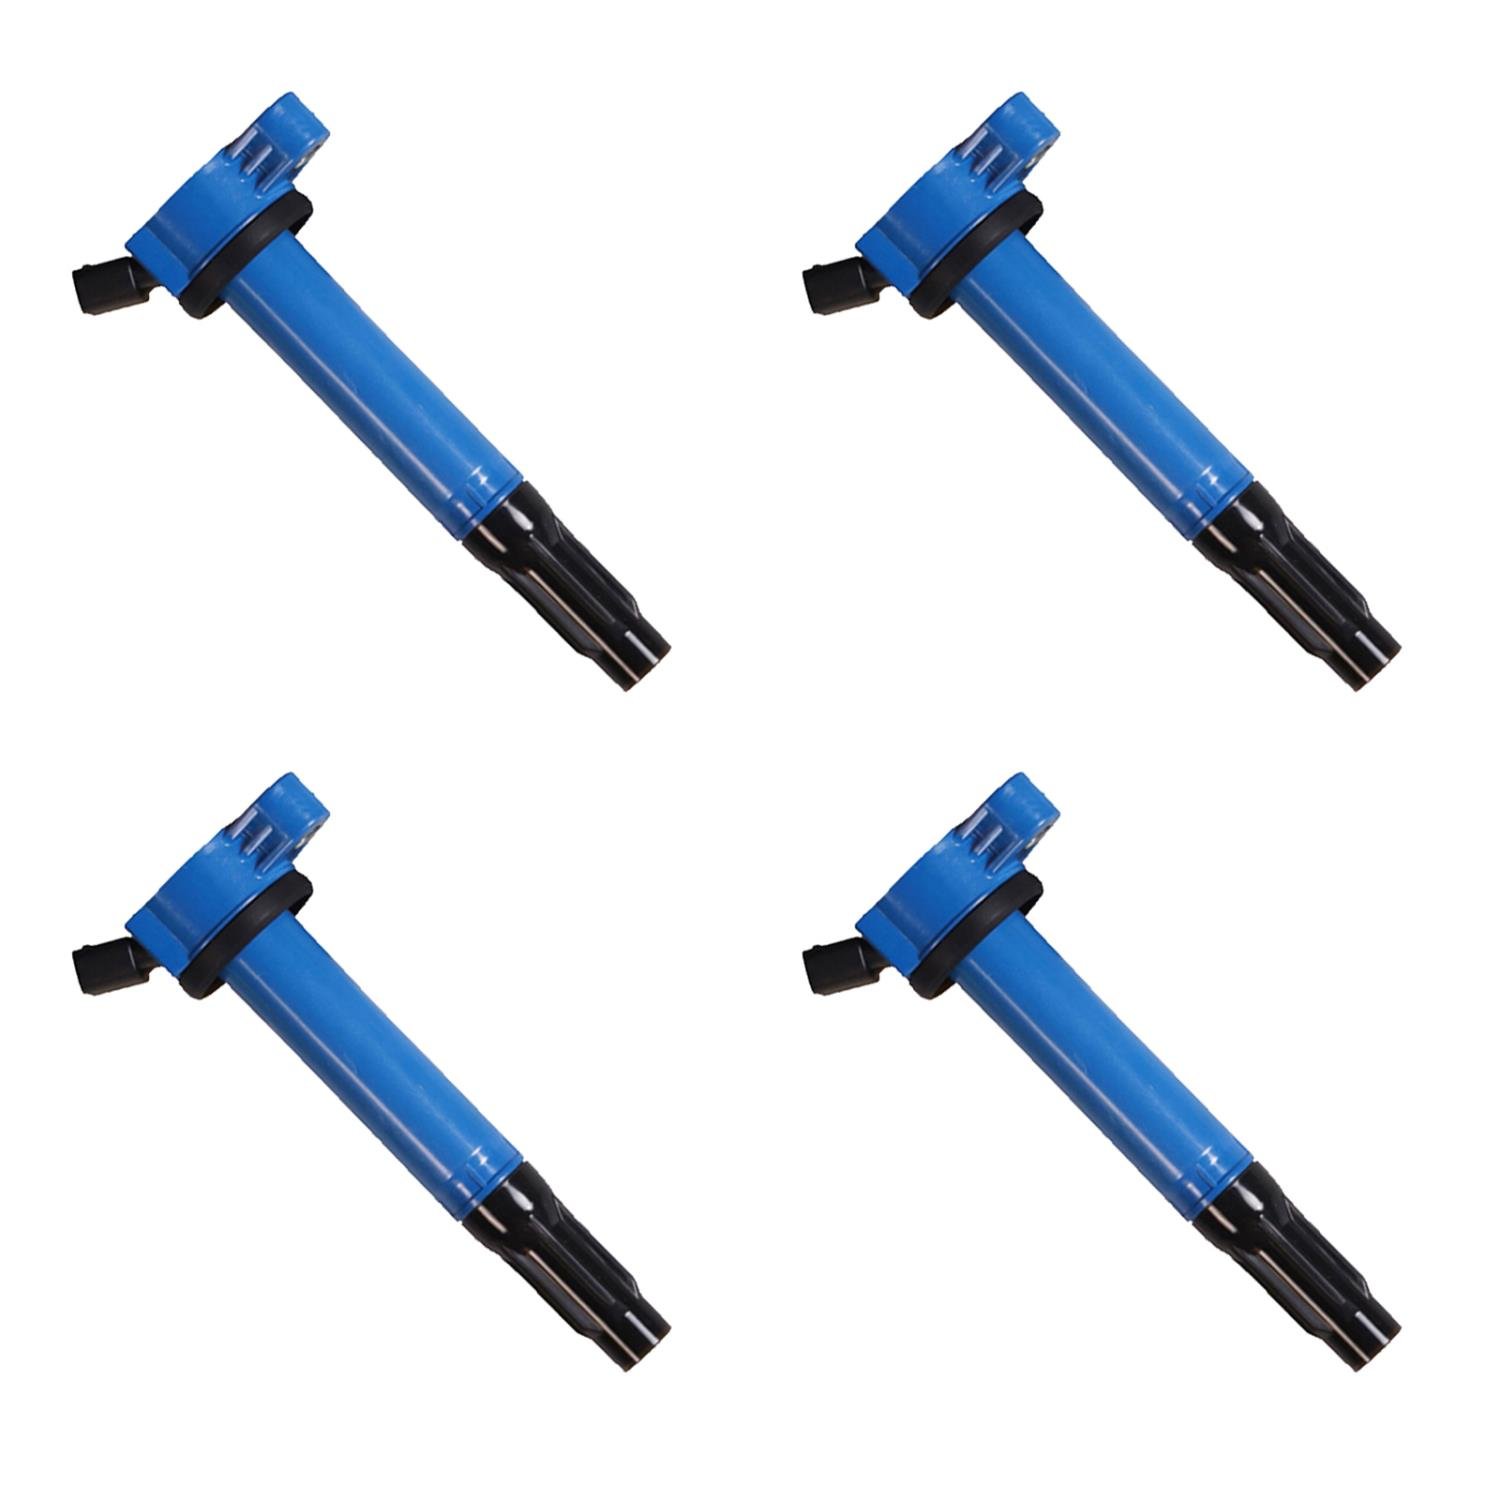 High-Performance Ignition Coils for Toyota Camry/RAV4 [Blue]